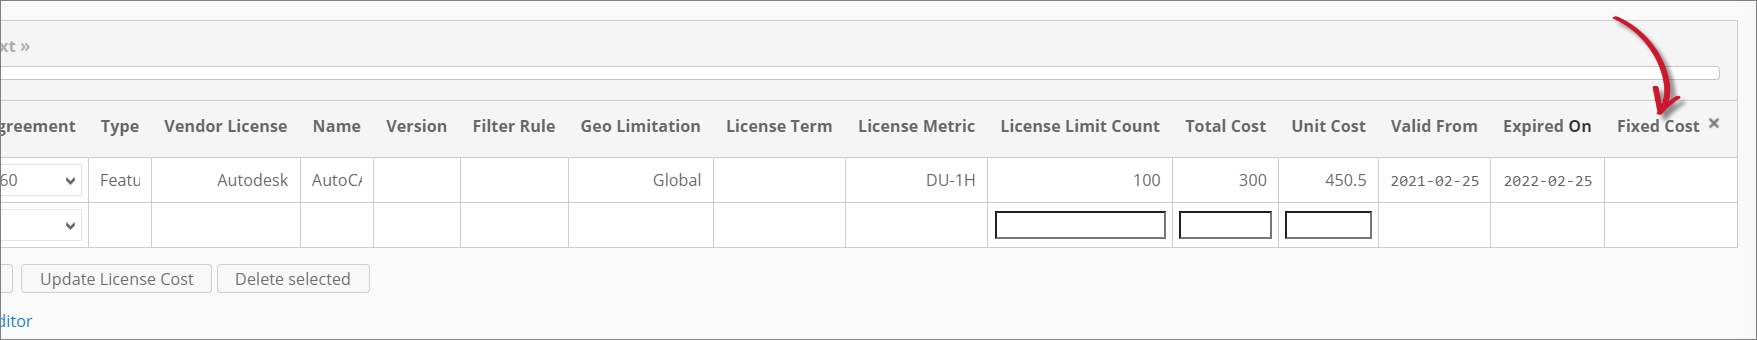 Analysis Server License Cost: New Field